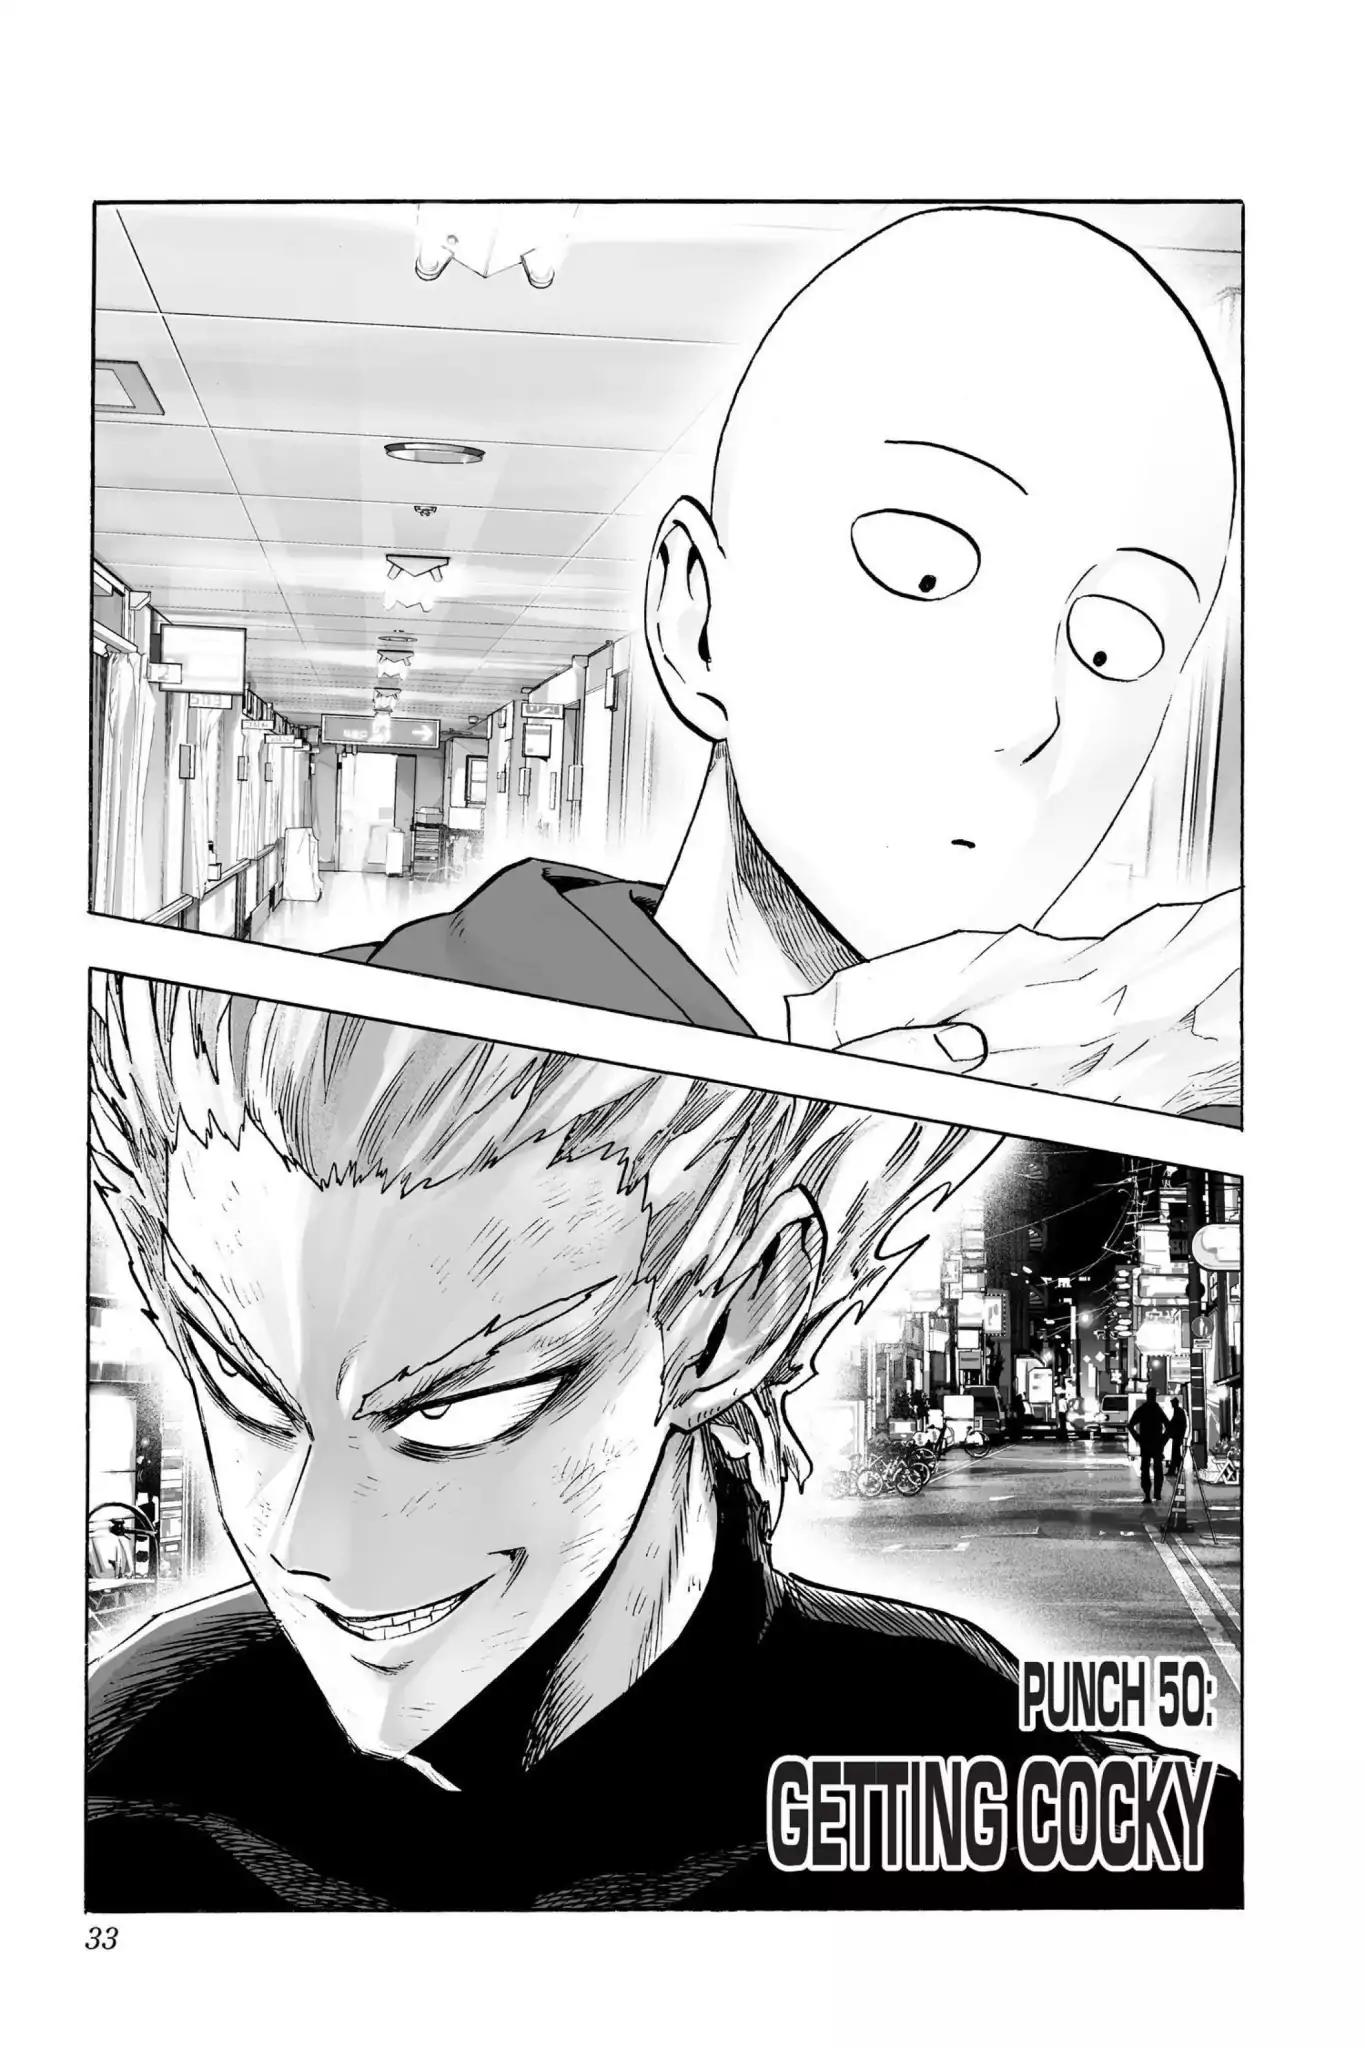 One Punch Man, Chapter 50 Getting Cocky image 01